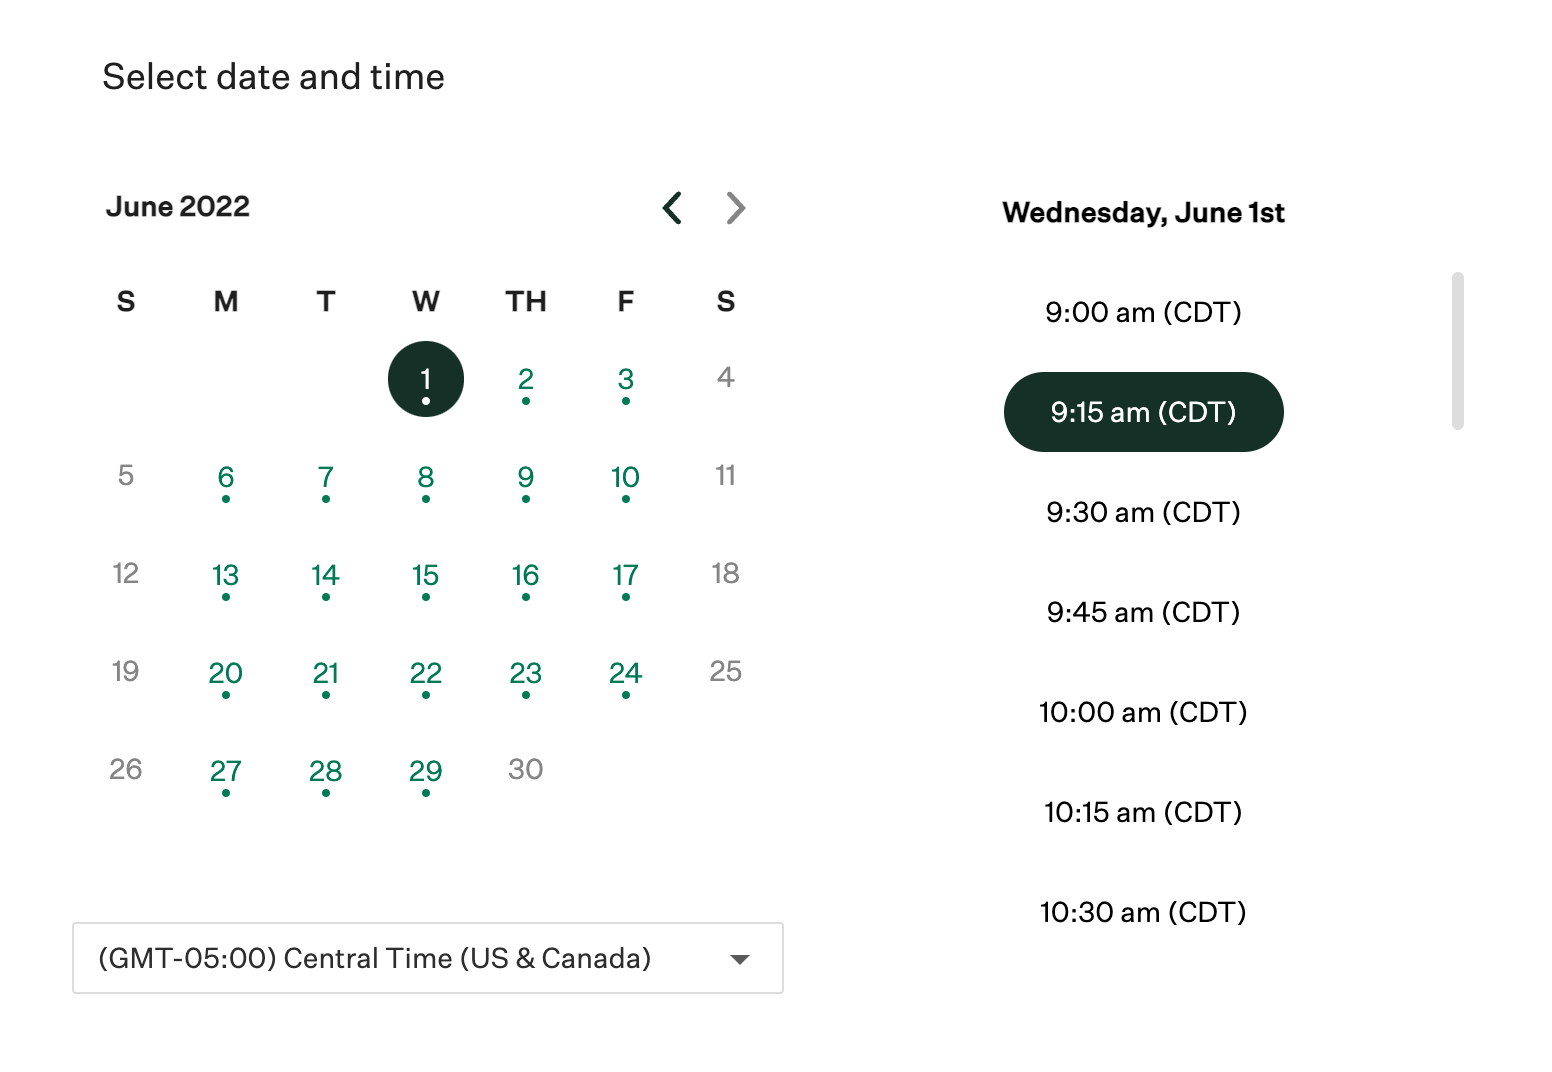 Screenshot of the self schedule calendar and time slots